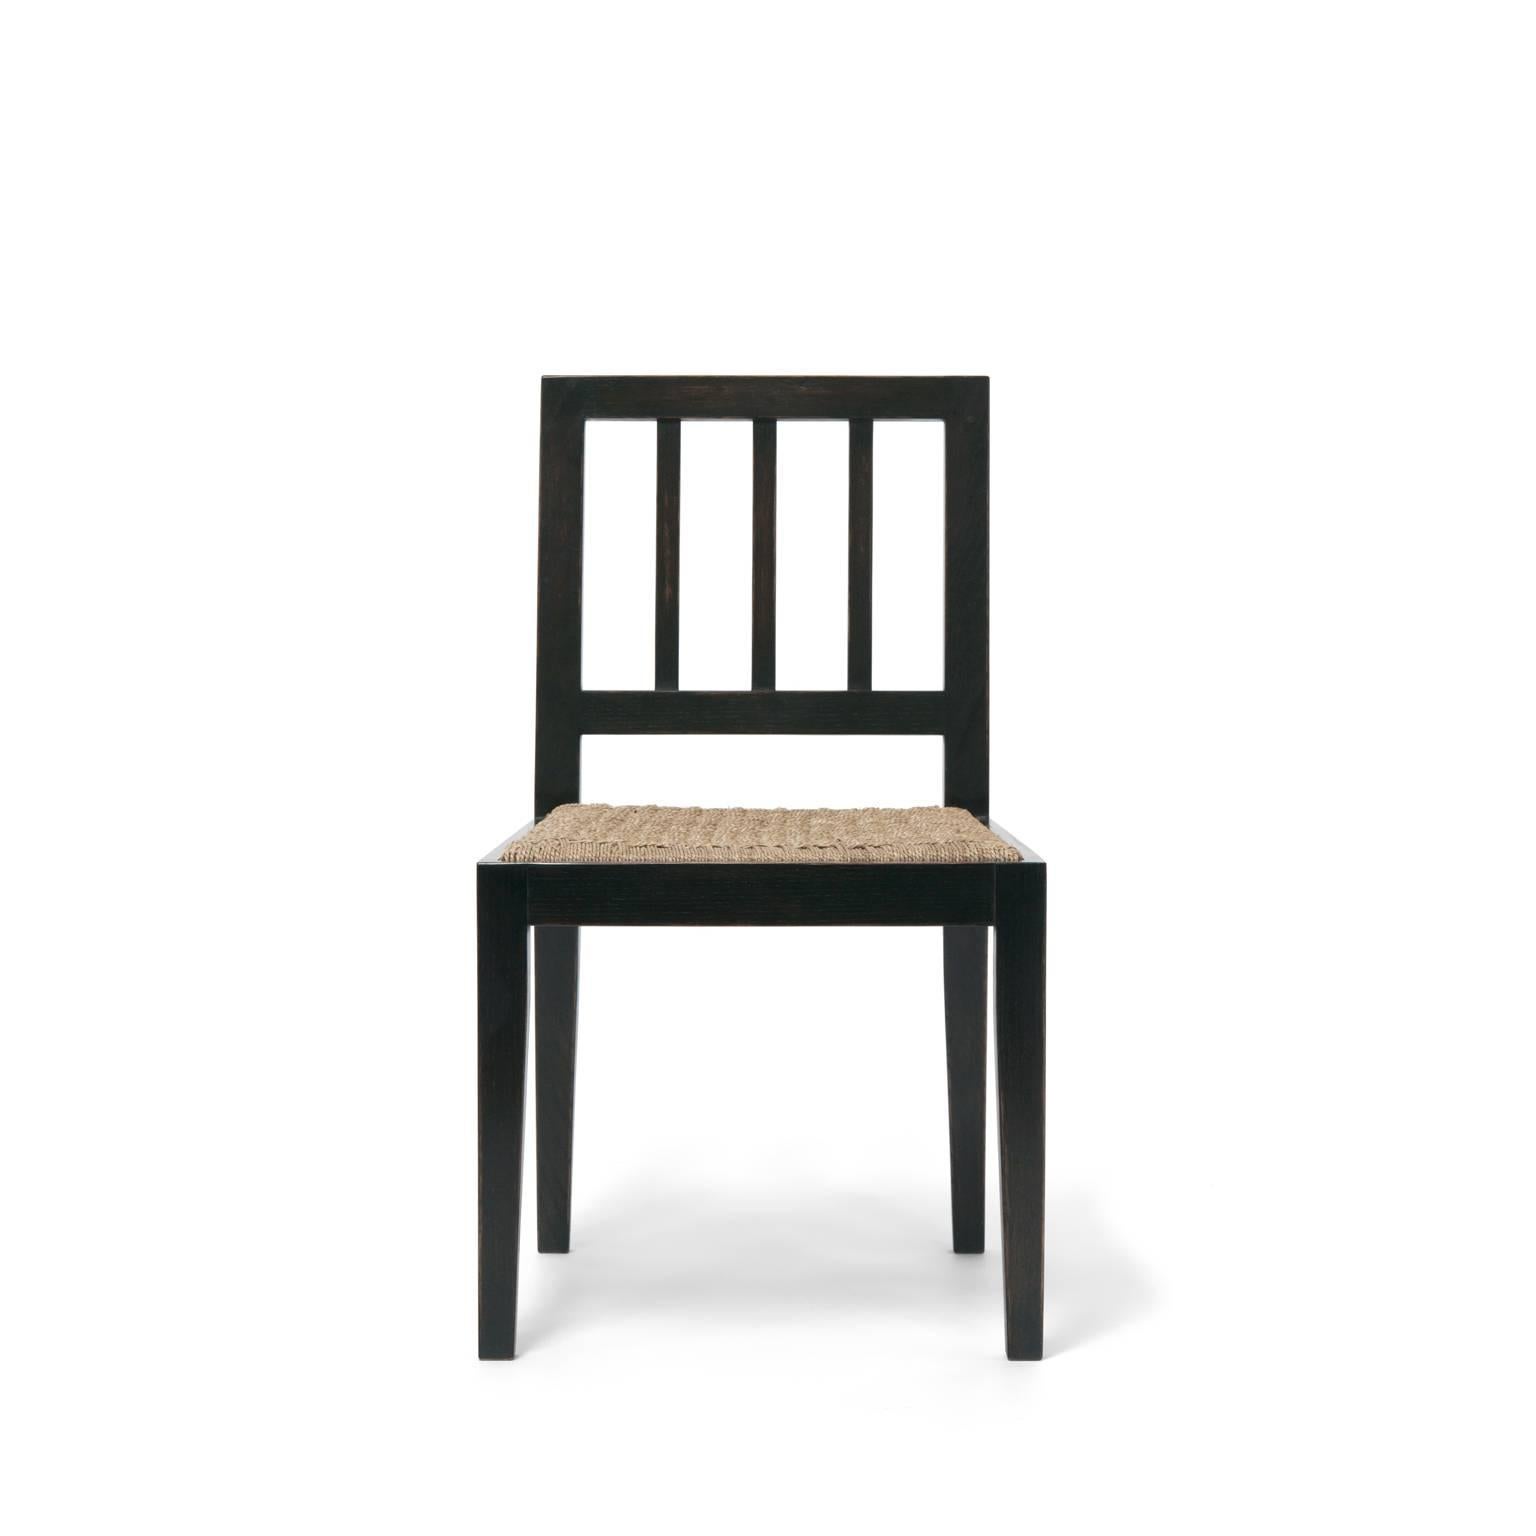 Atelier Demiurge Collection Mercer Chair shown in oak with antique ebonized finish. Inquire for finish and customization options. As shown or COM 1 yard.

Atelier Demiurge Collection pieces are made to order, and custom sizes are available. Please